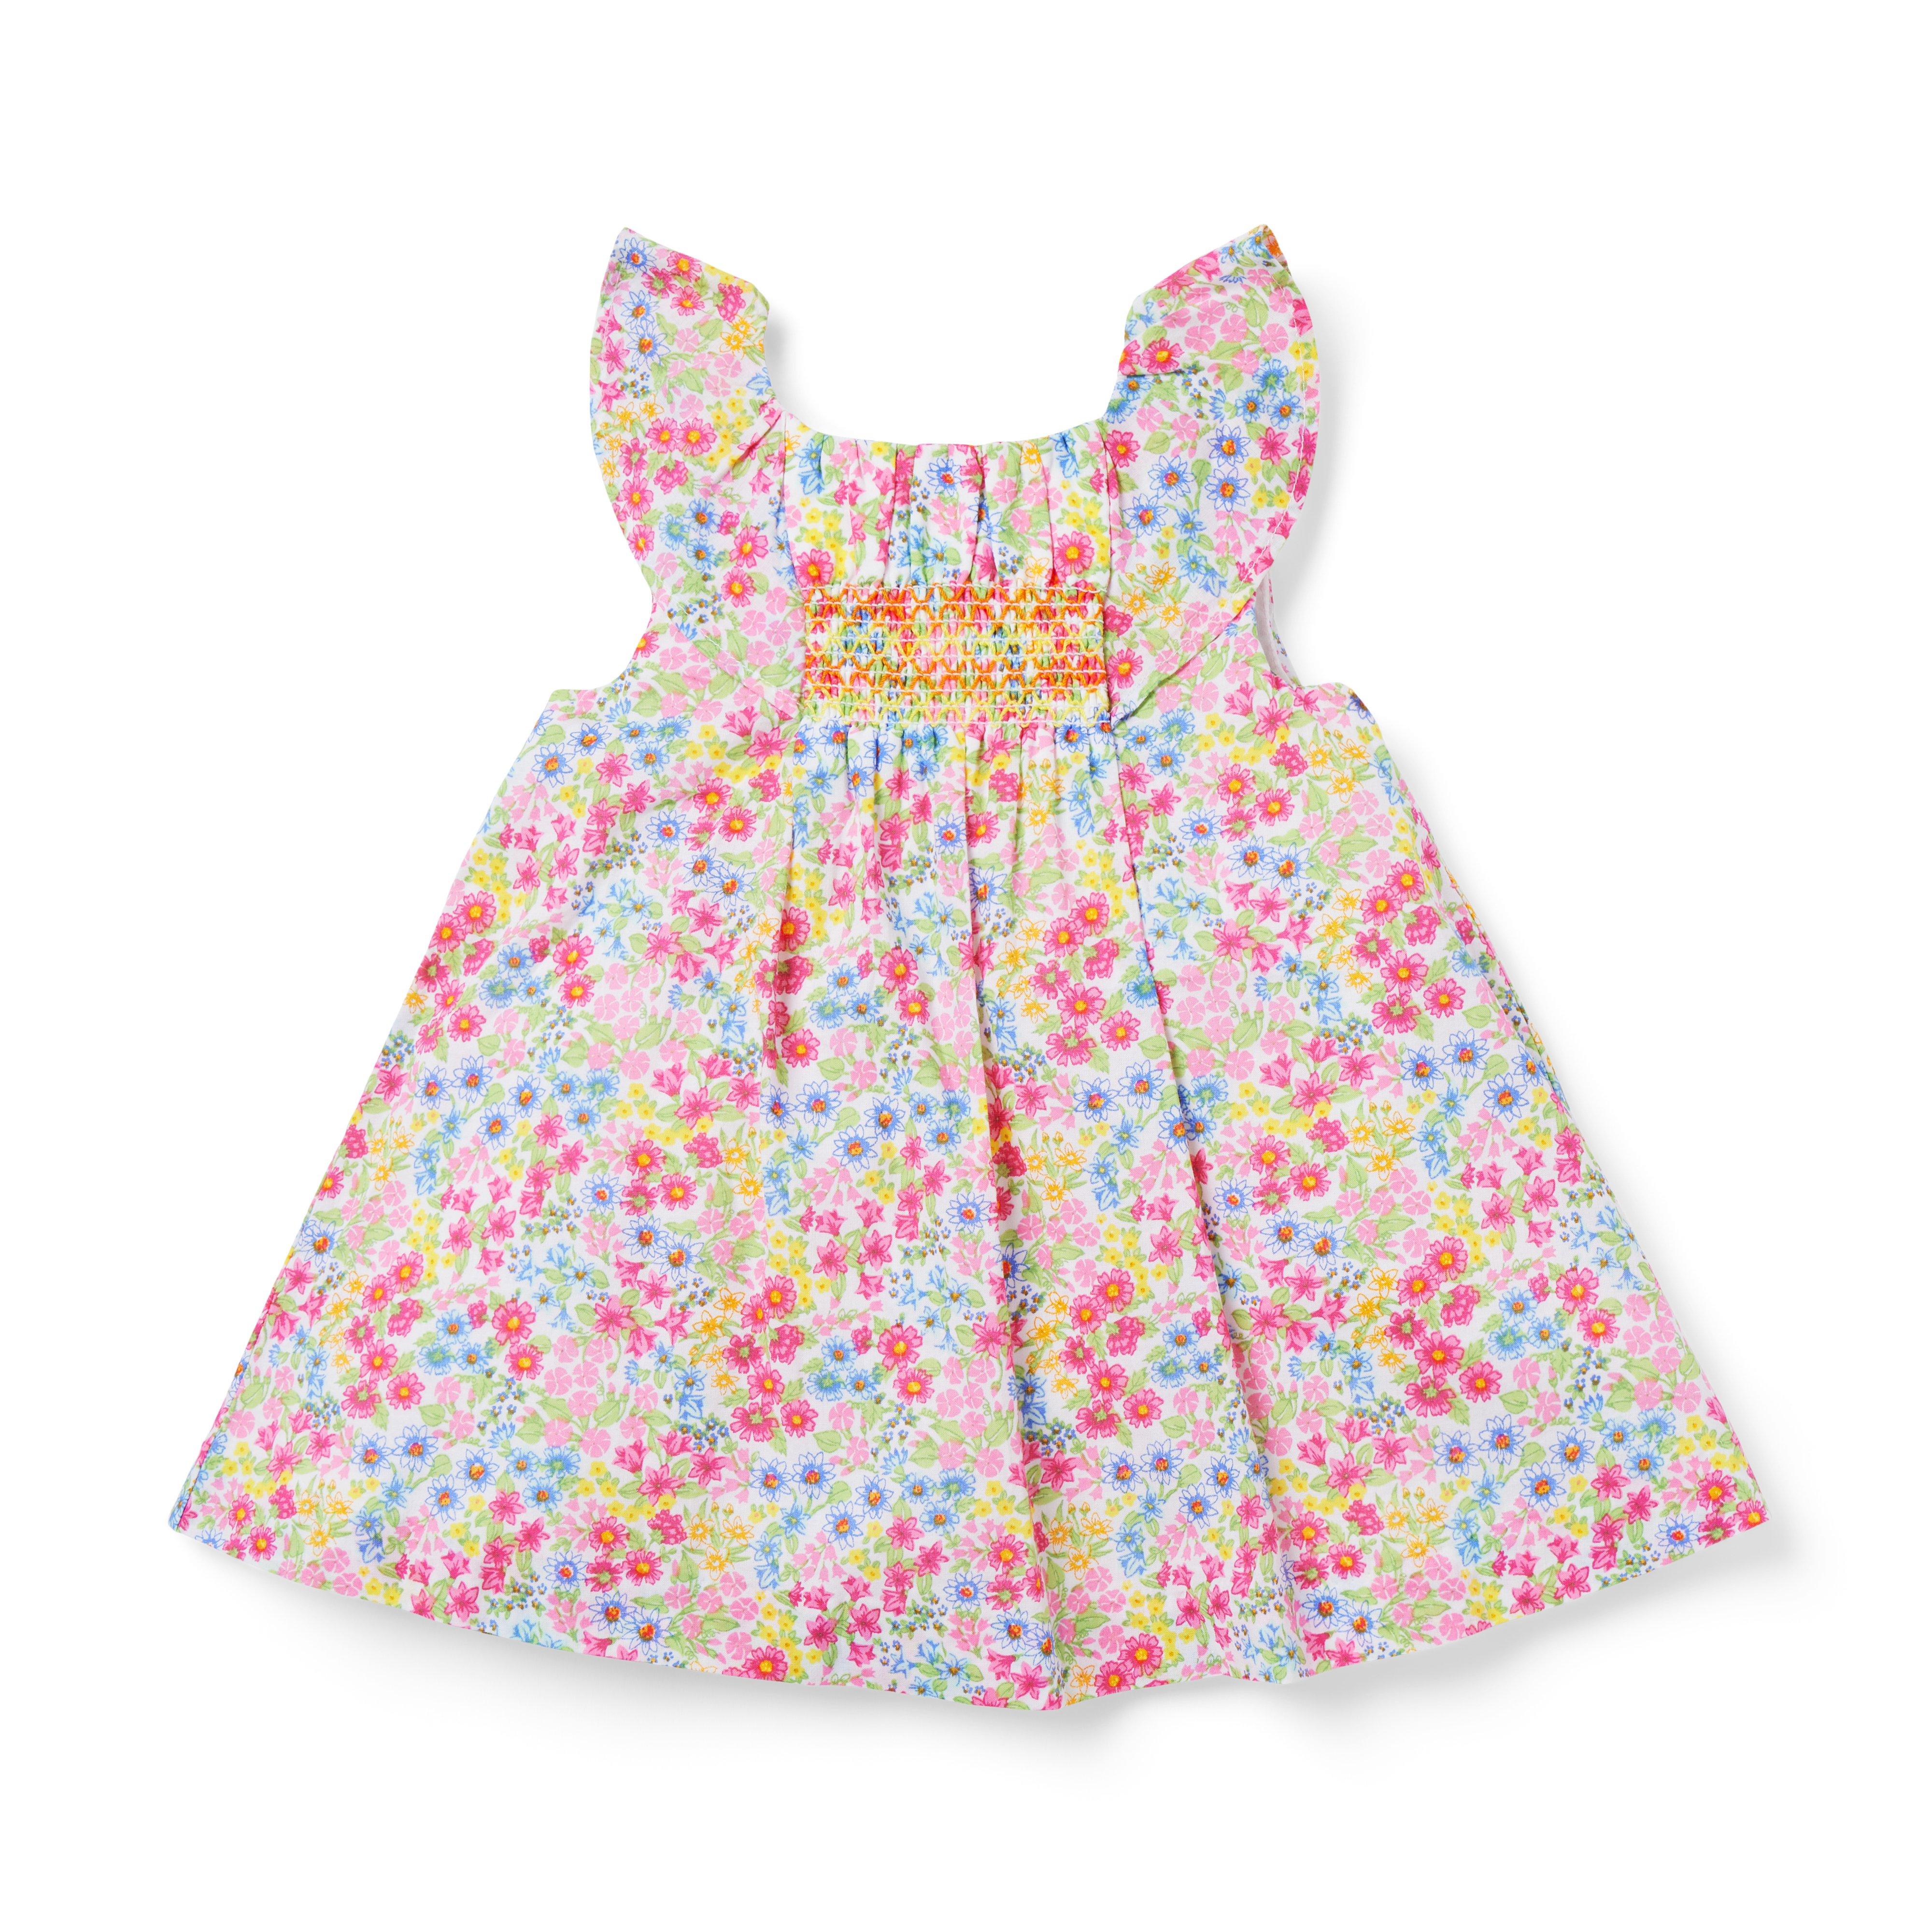 Newborn White Floral The Sunny Smocked Baby Dress by Janie and Jack